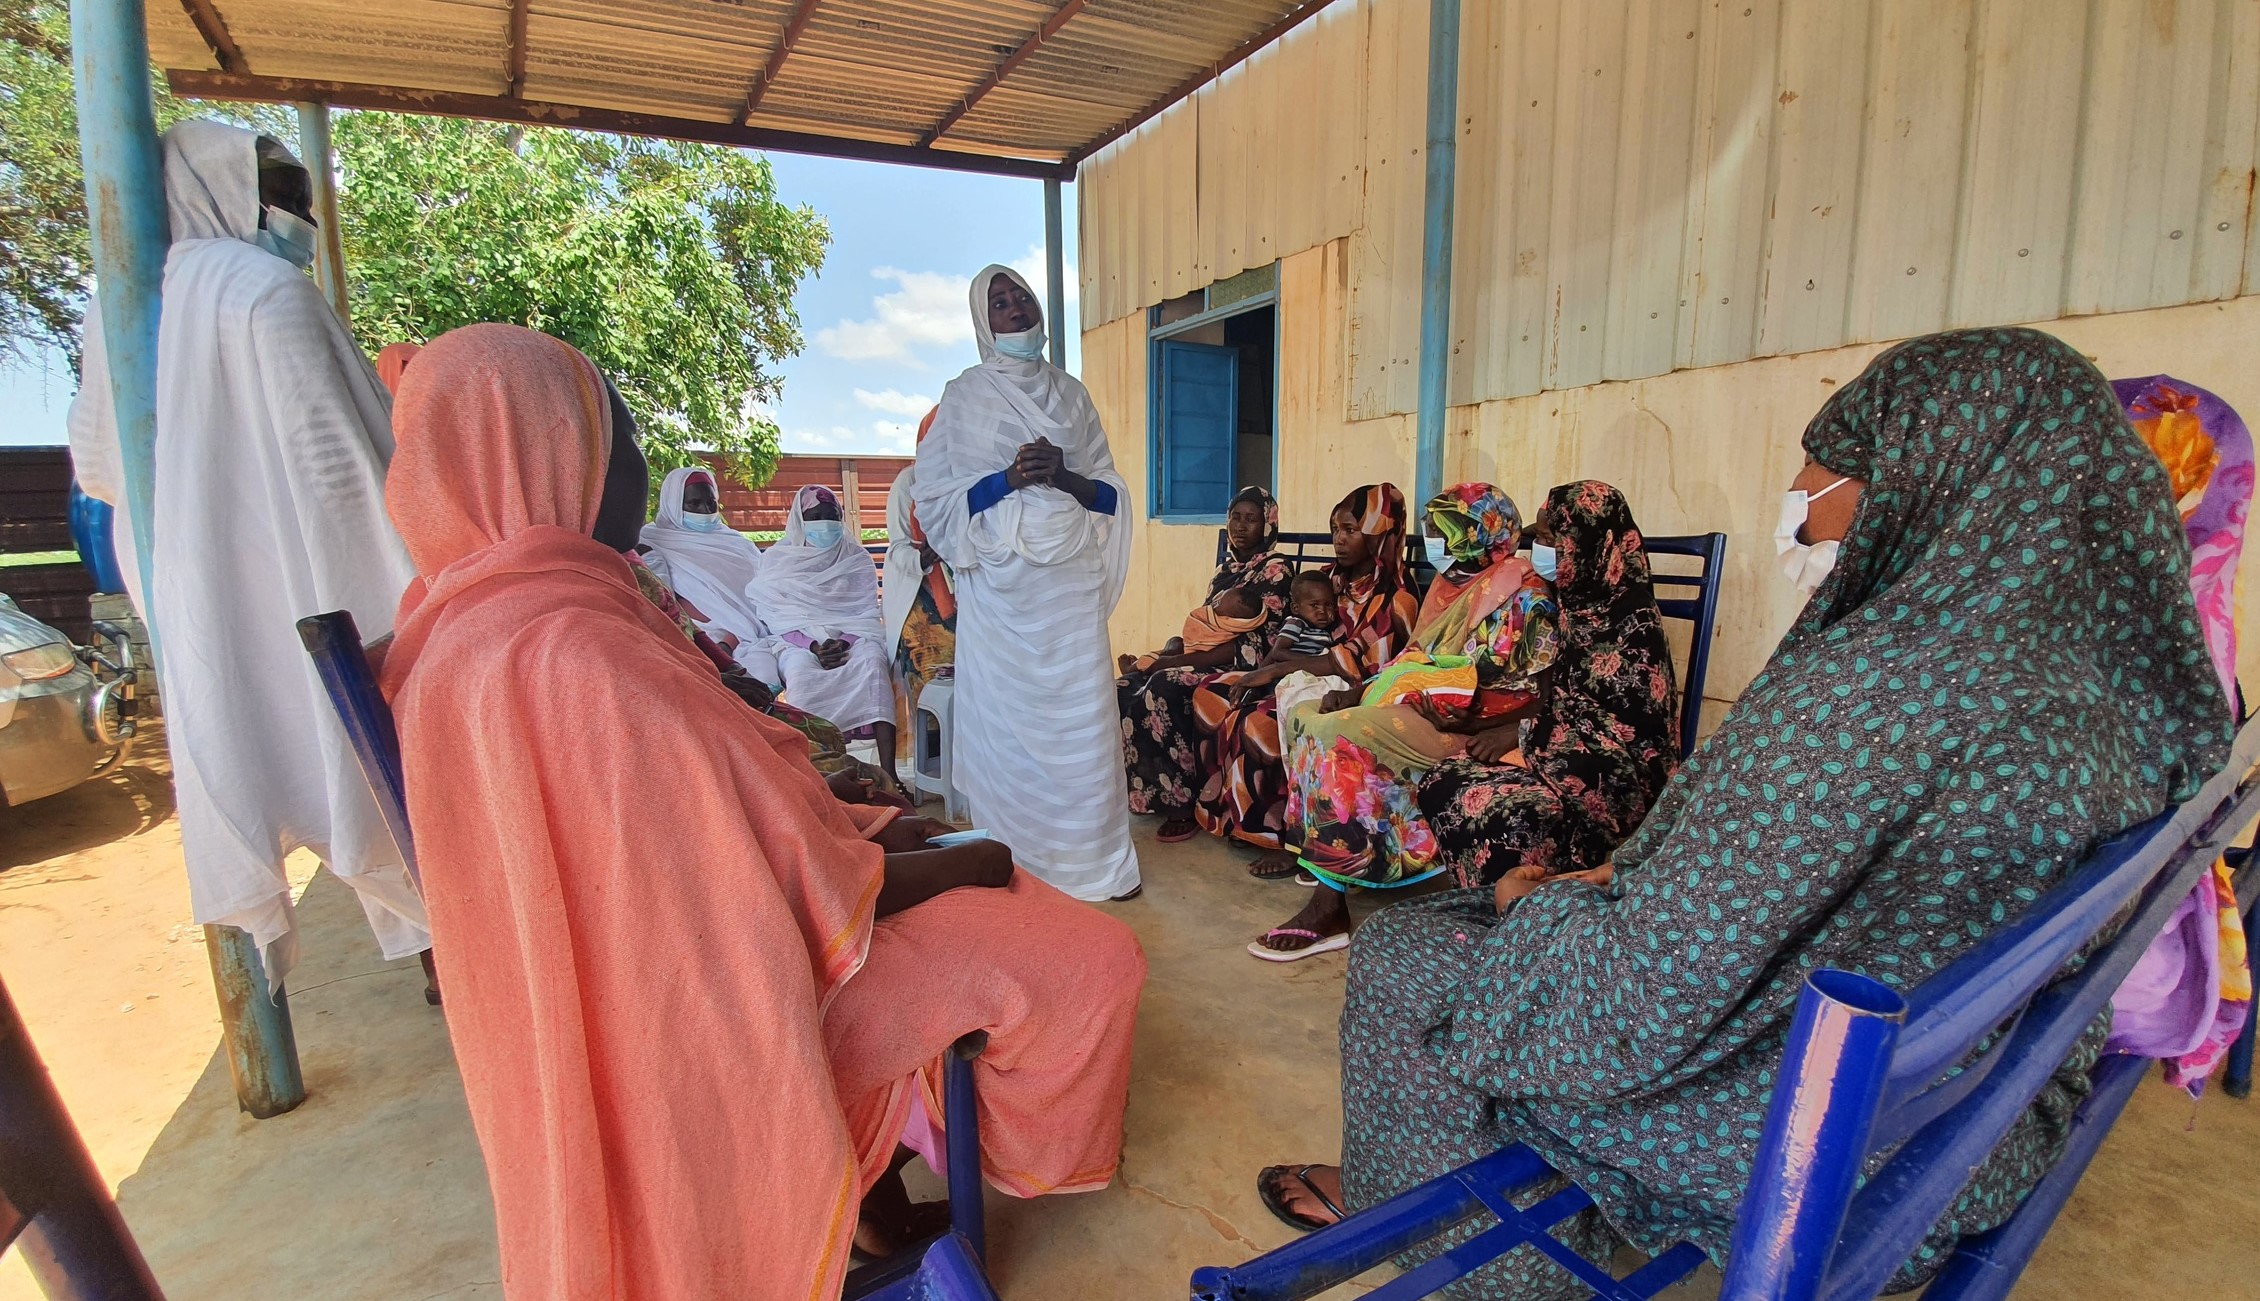 Nutrition workers at a health center in Darfur hold a community education session on maternal nutrition and breastfeeding